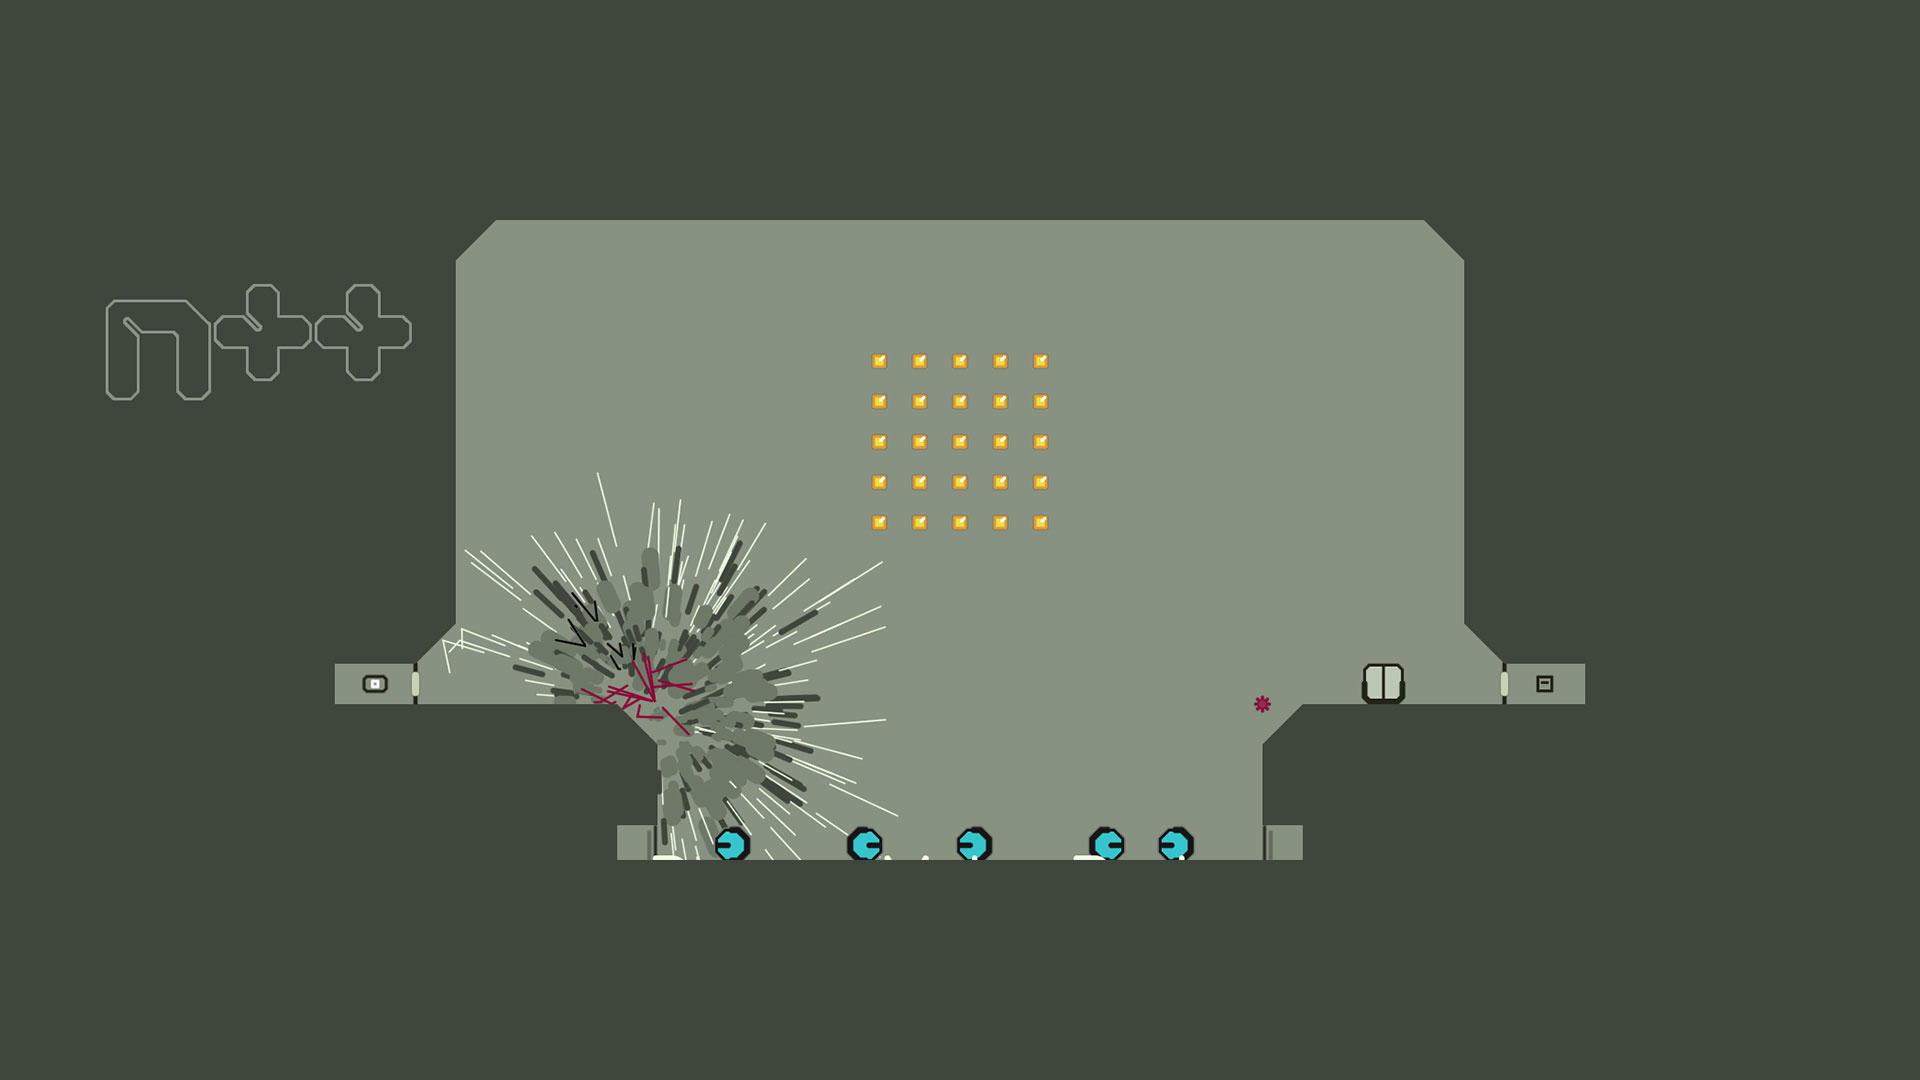 Screenshots of the recently released N++ show it stays true to the minimalistic 2D design of its predecessors.